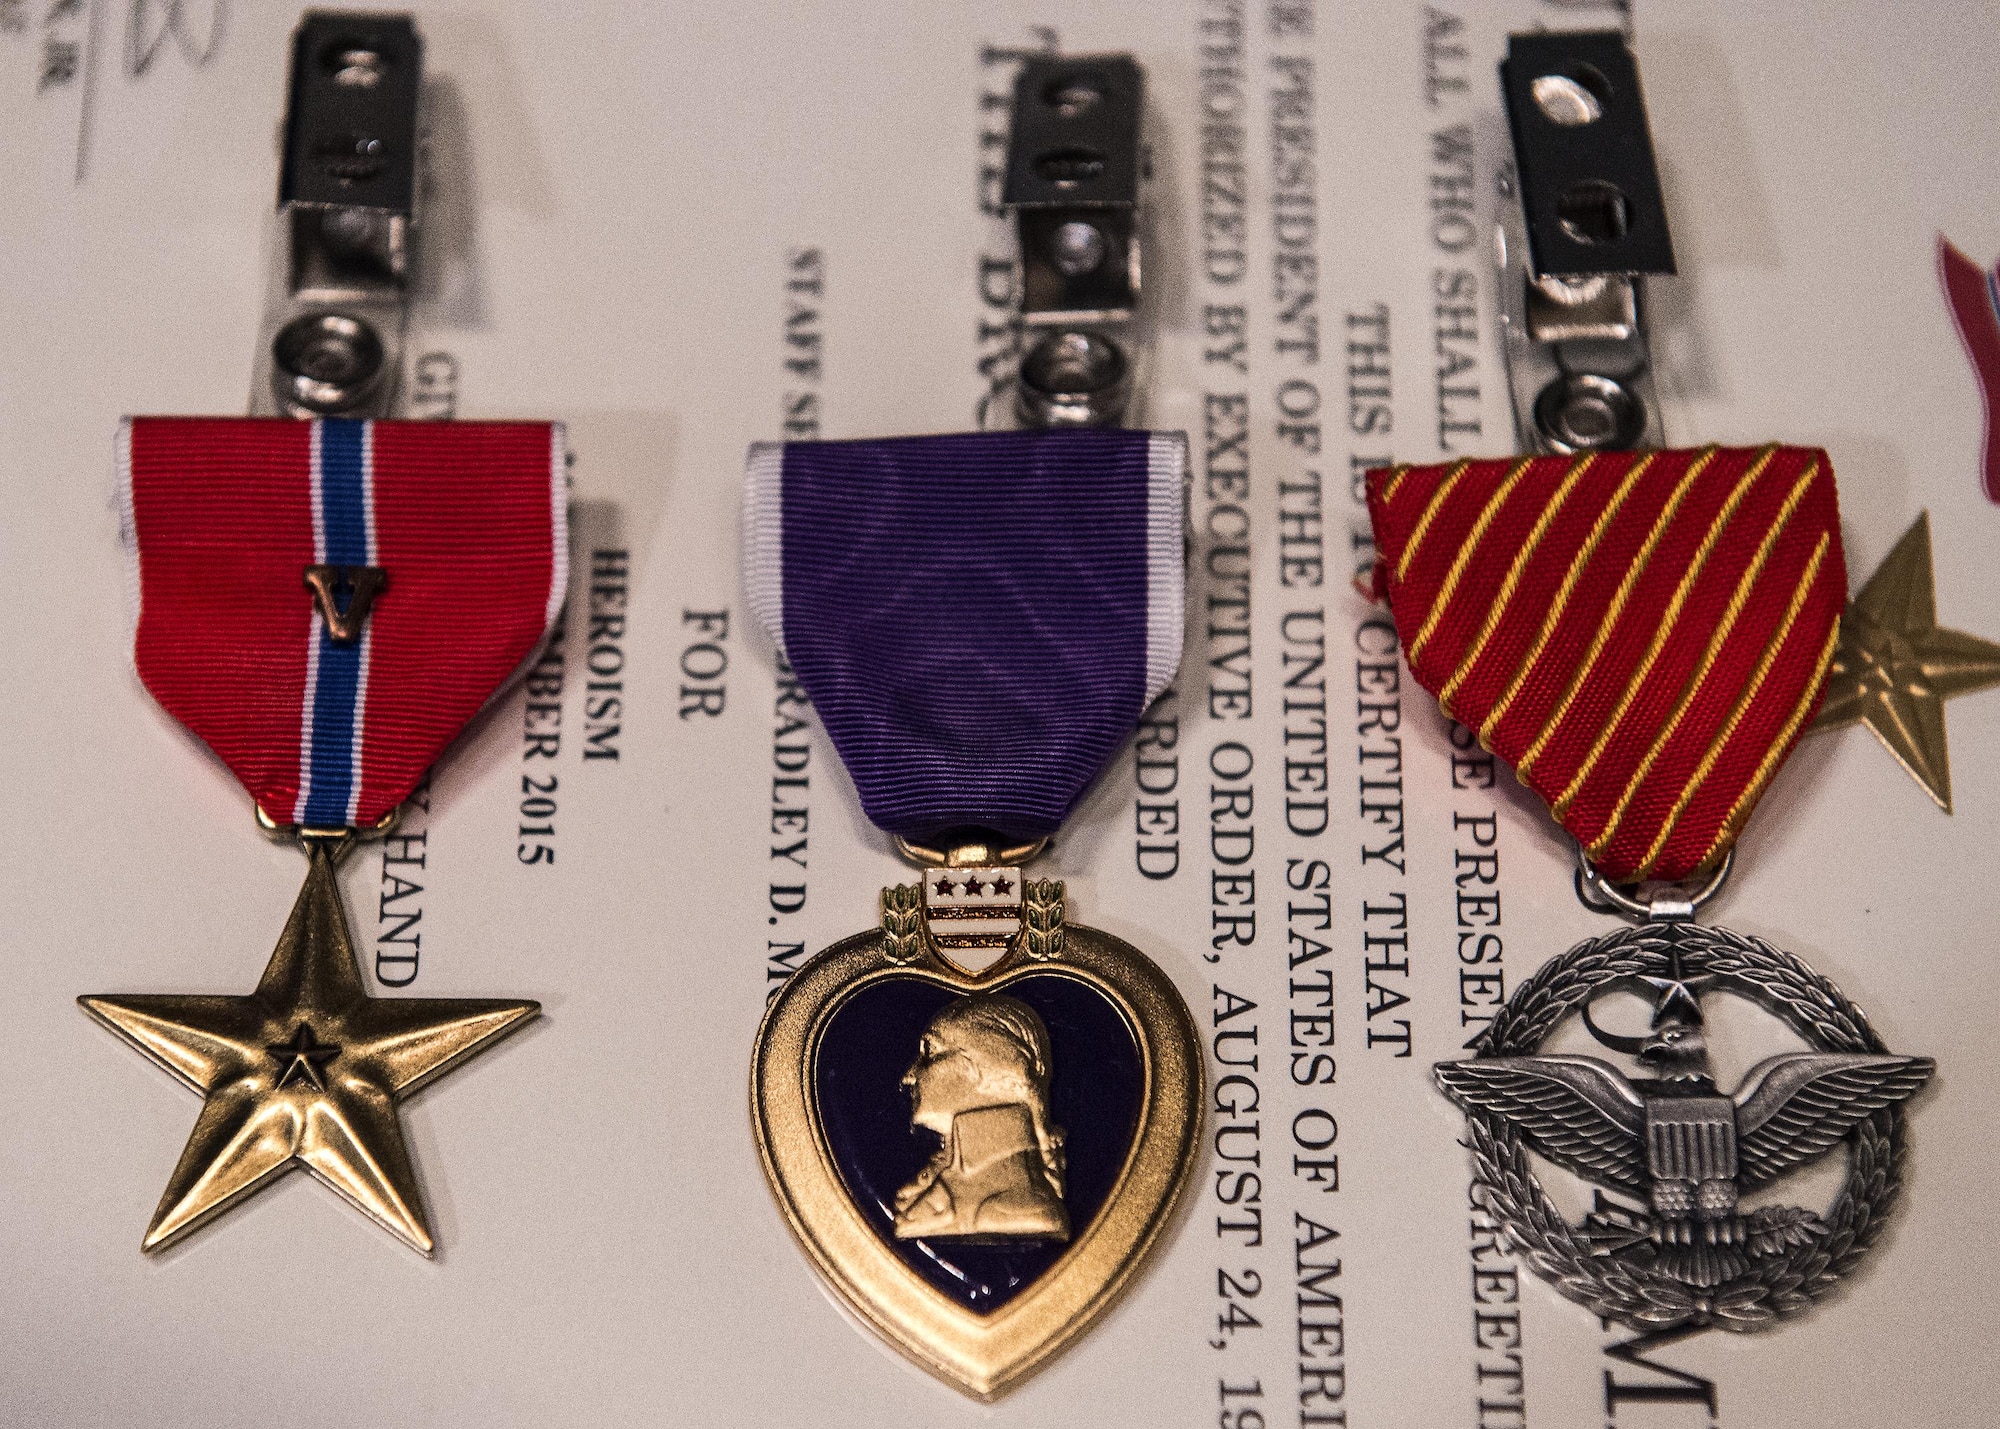 Medals sit on display during a medallion ceremony, July 8, 2016, at Moody Air Force Base, Ga. The 820th Base Defense Group presented a Bronze Star with Valor, Air Force Combat Action Medal and Purple Heart to both U.S. Air Force Master Sgt. Aaron Frederick, 93d Air Ground Operations Wing command chief executive assistant and Staff Sgt. Bradley Mock 824 Base Defense Squadron superintendent of supply, for their actions during an attack Dec. 21, 2015, in Southwest Asia. (U.S. Air Force photo by Airman 1st Class Janiqua P. Robinson/Released)